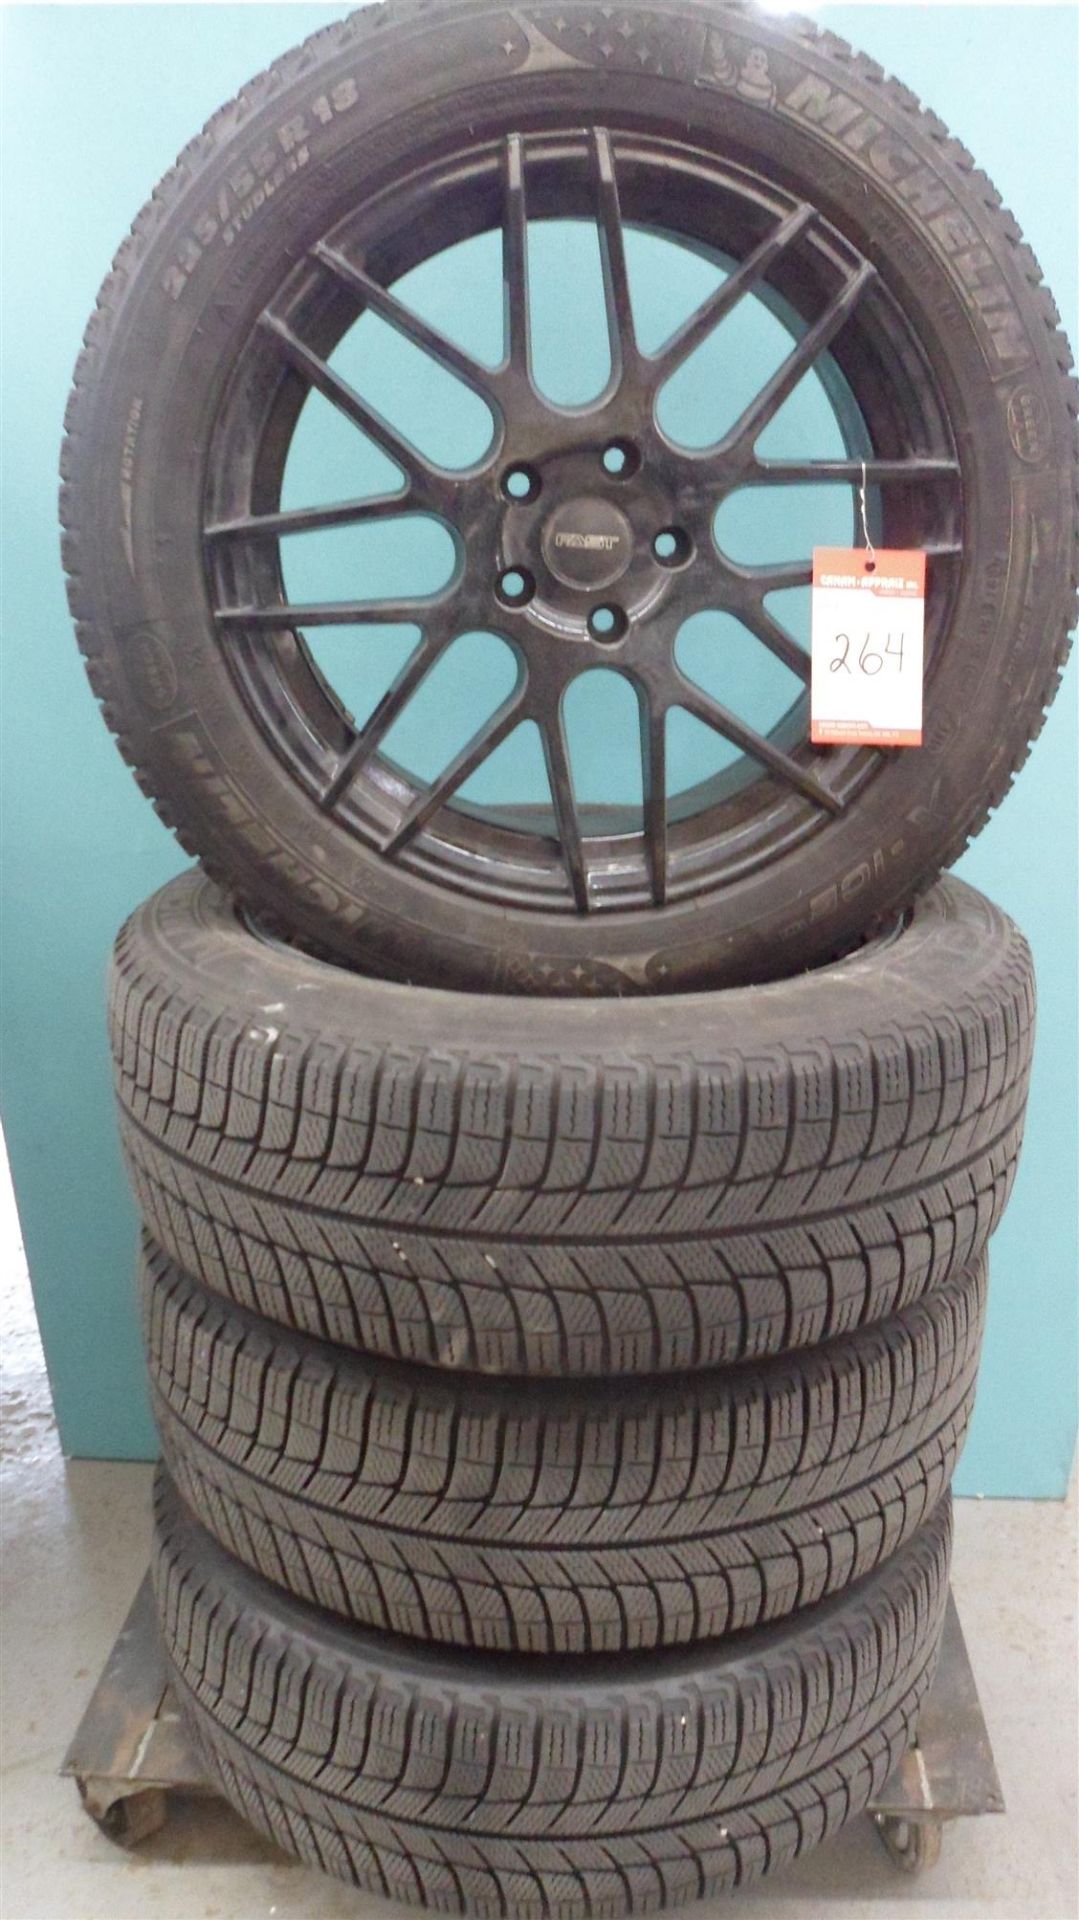 MICHELIN - 255/55/R18 STUDLESS WINTER TIRES W/FAST RIMS